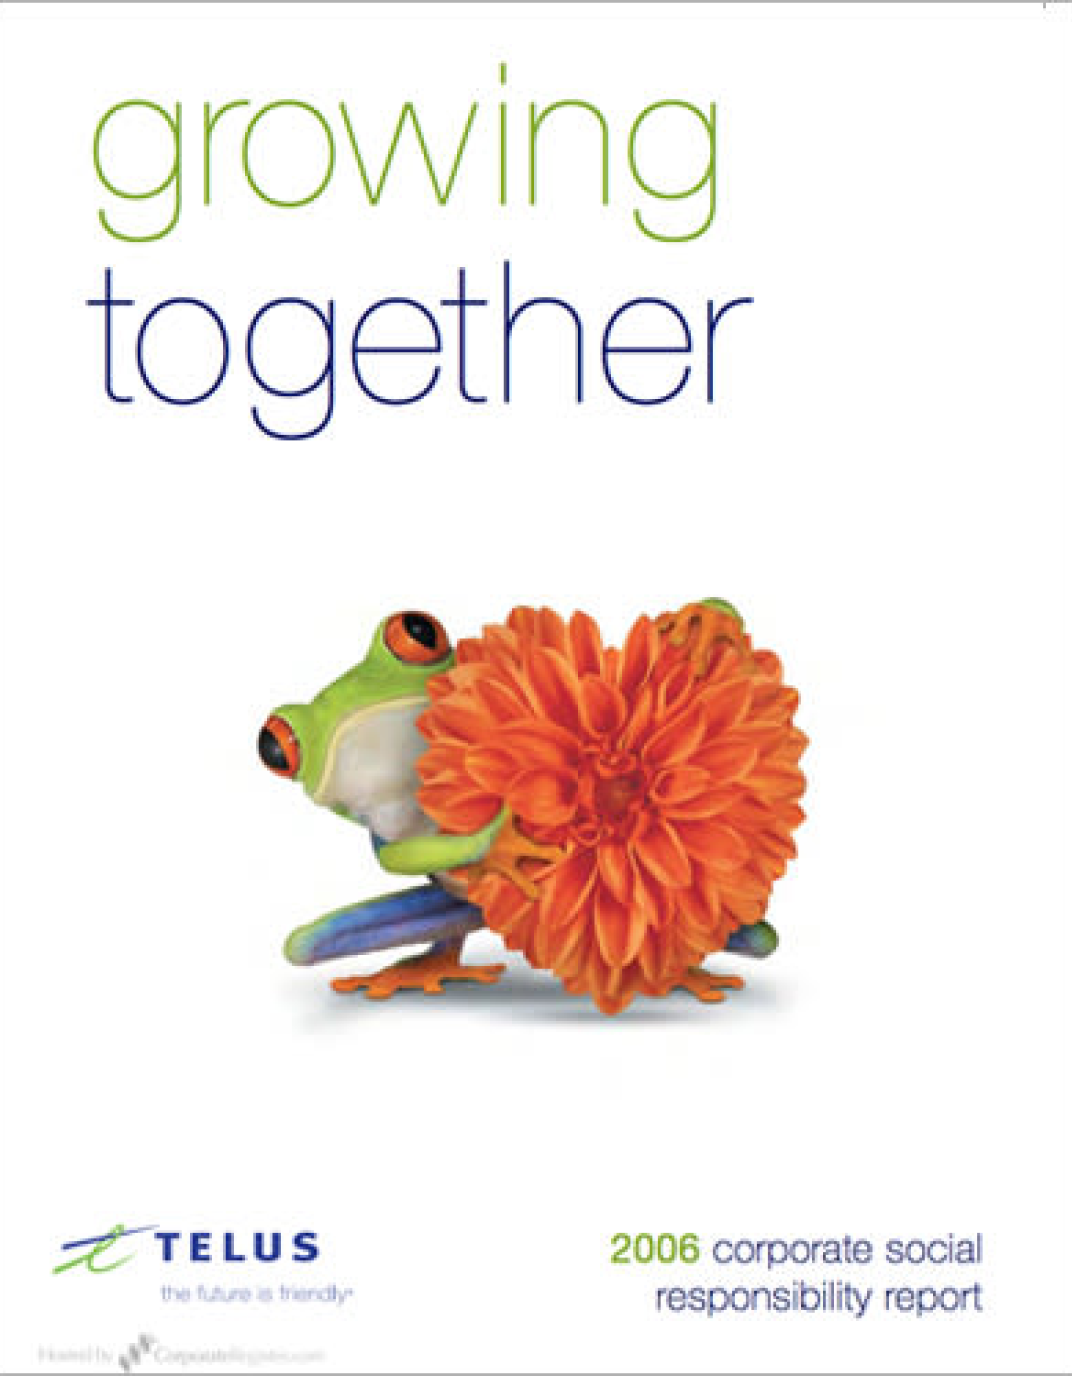 The cover of the 2006 TELUS Sustainability Report